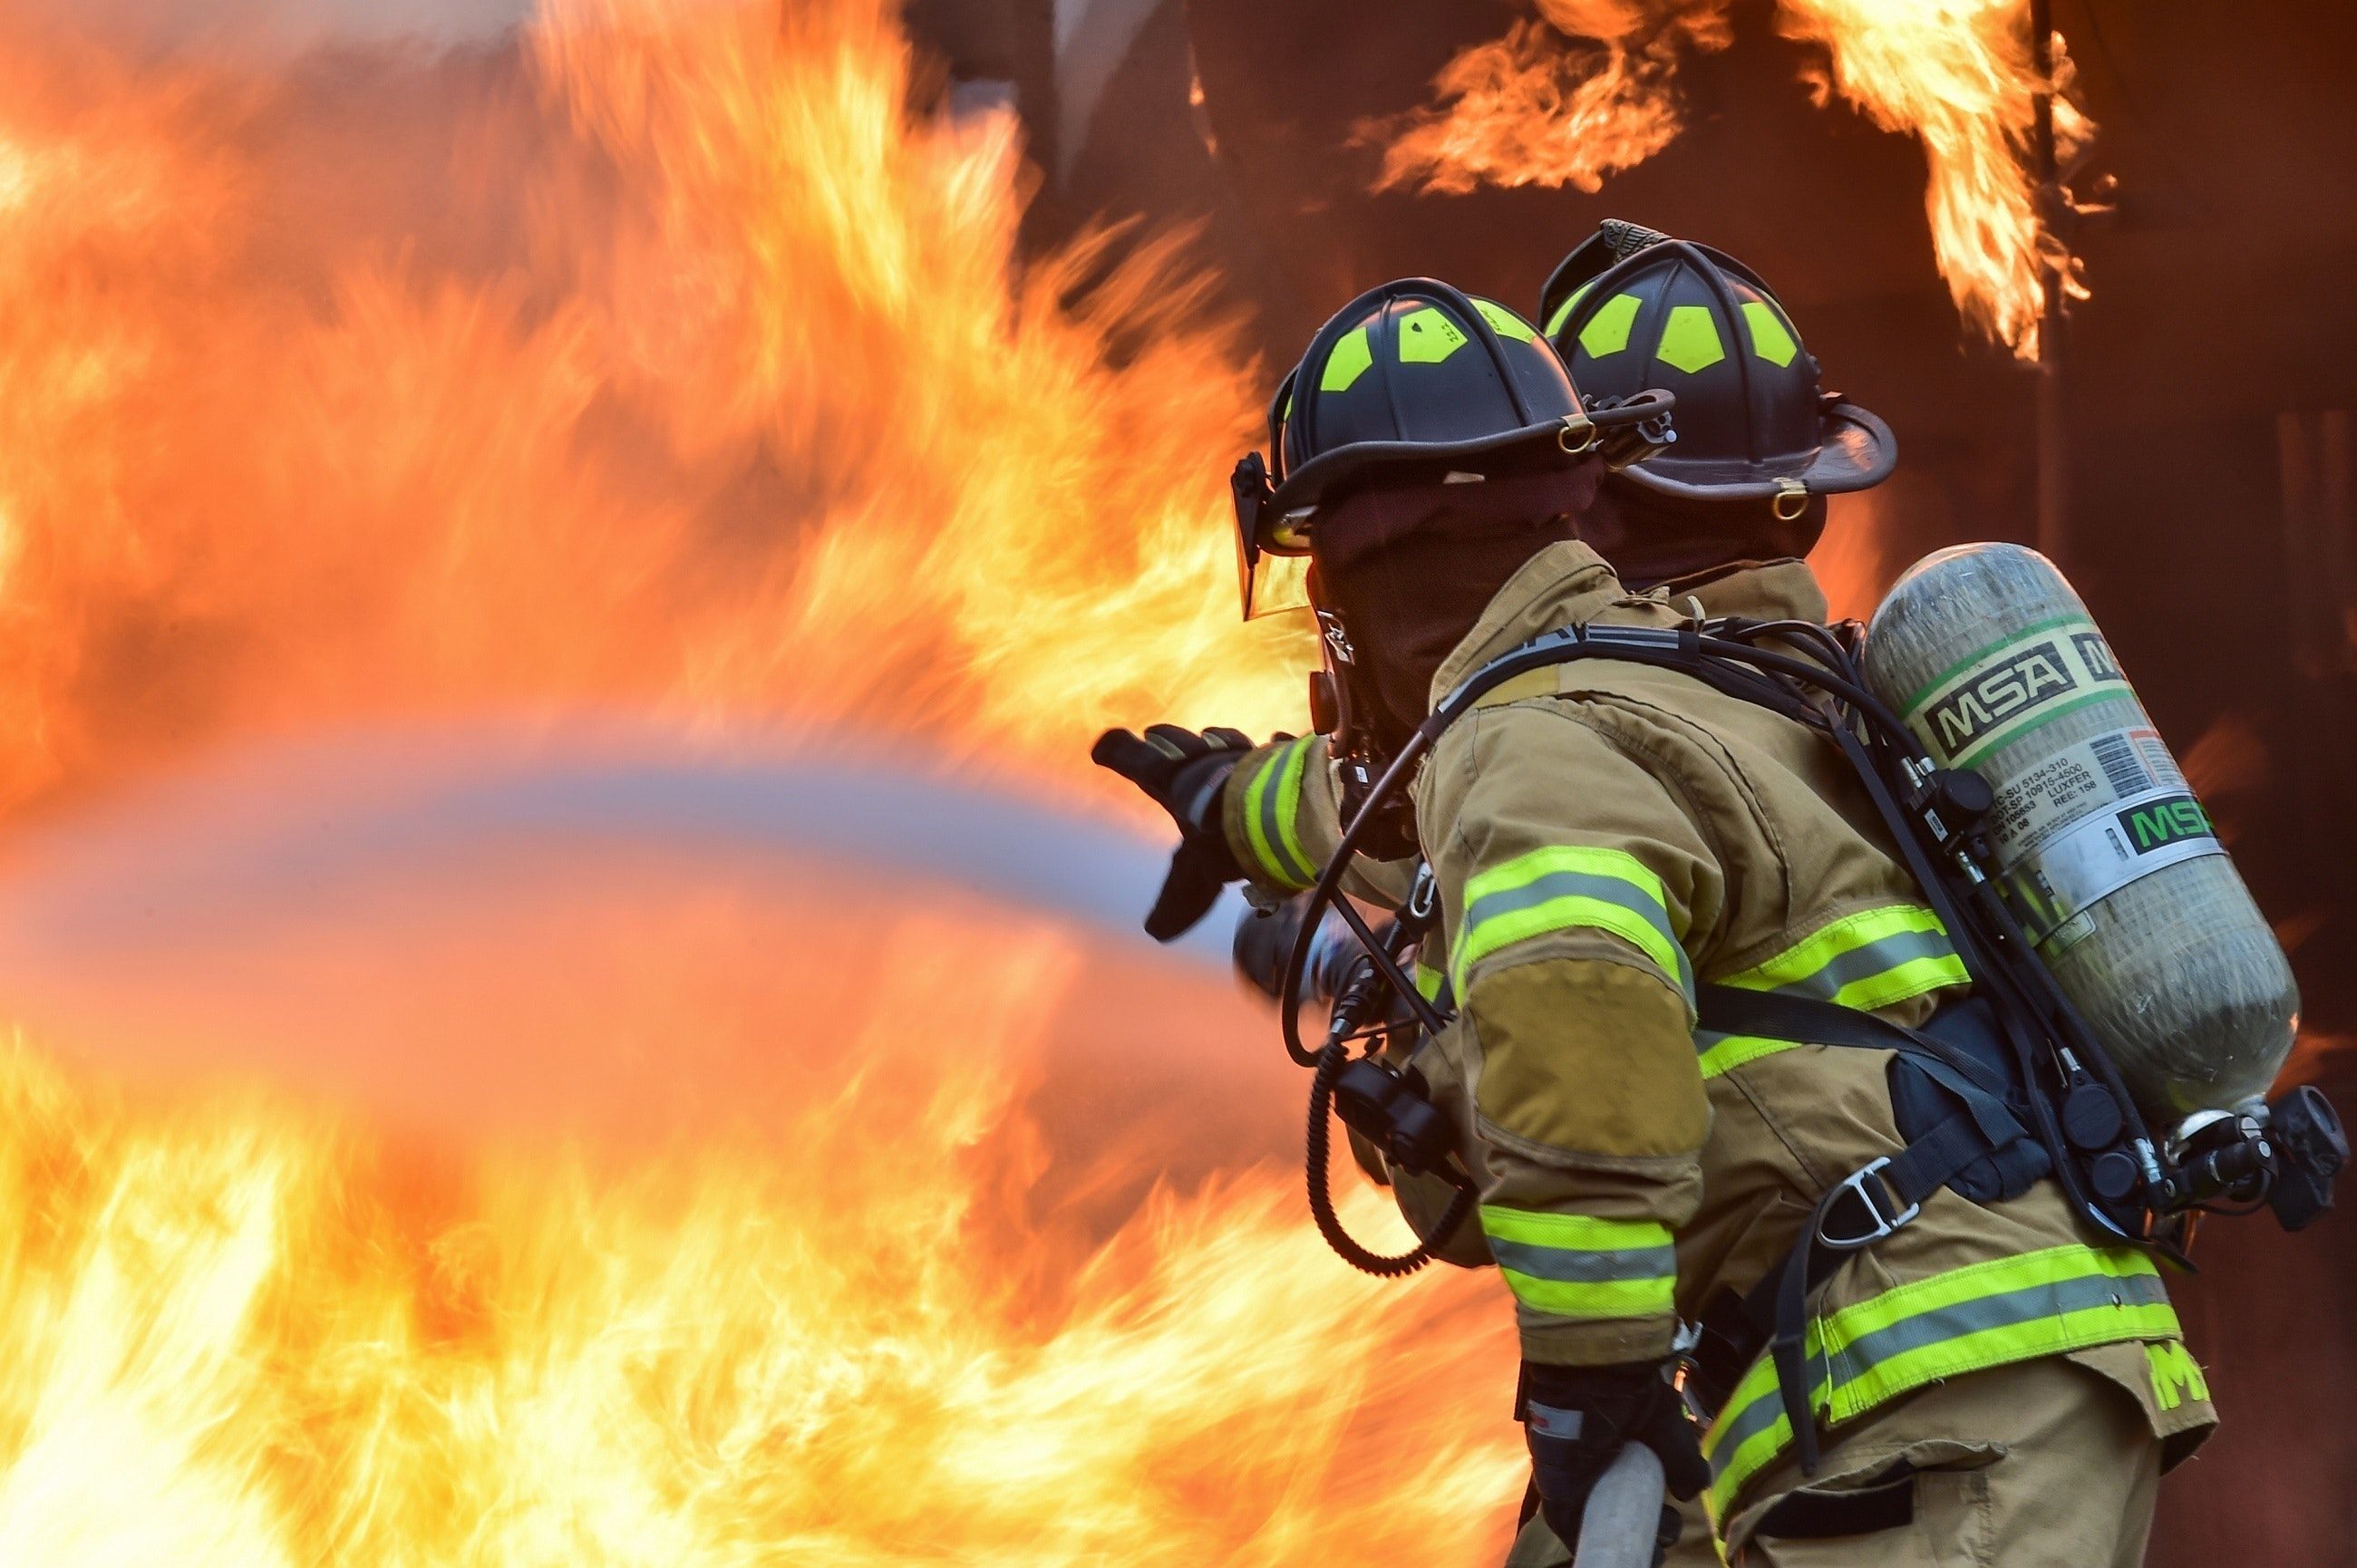 Fire damage to your business and inventory